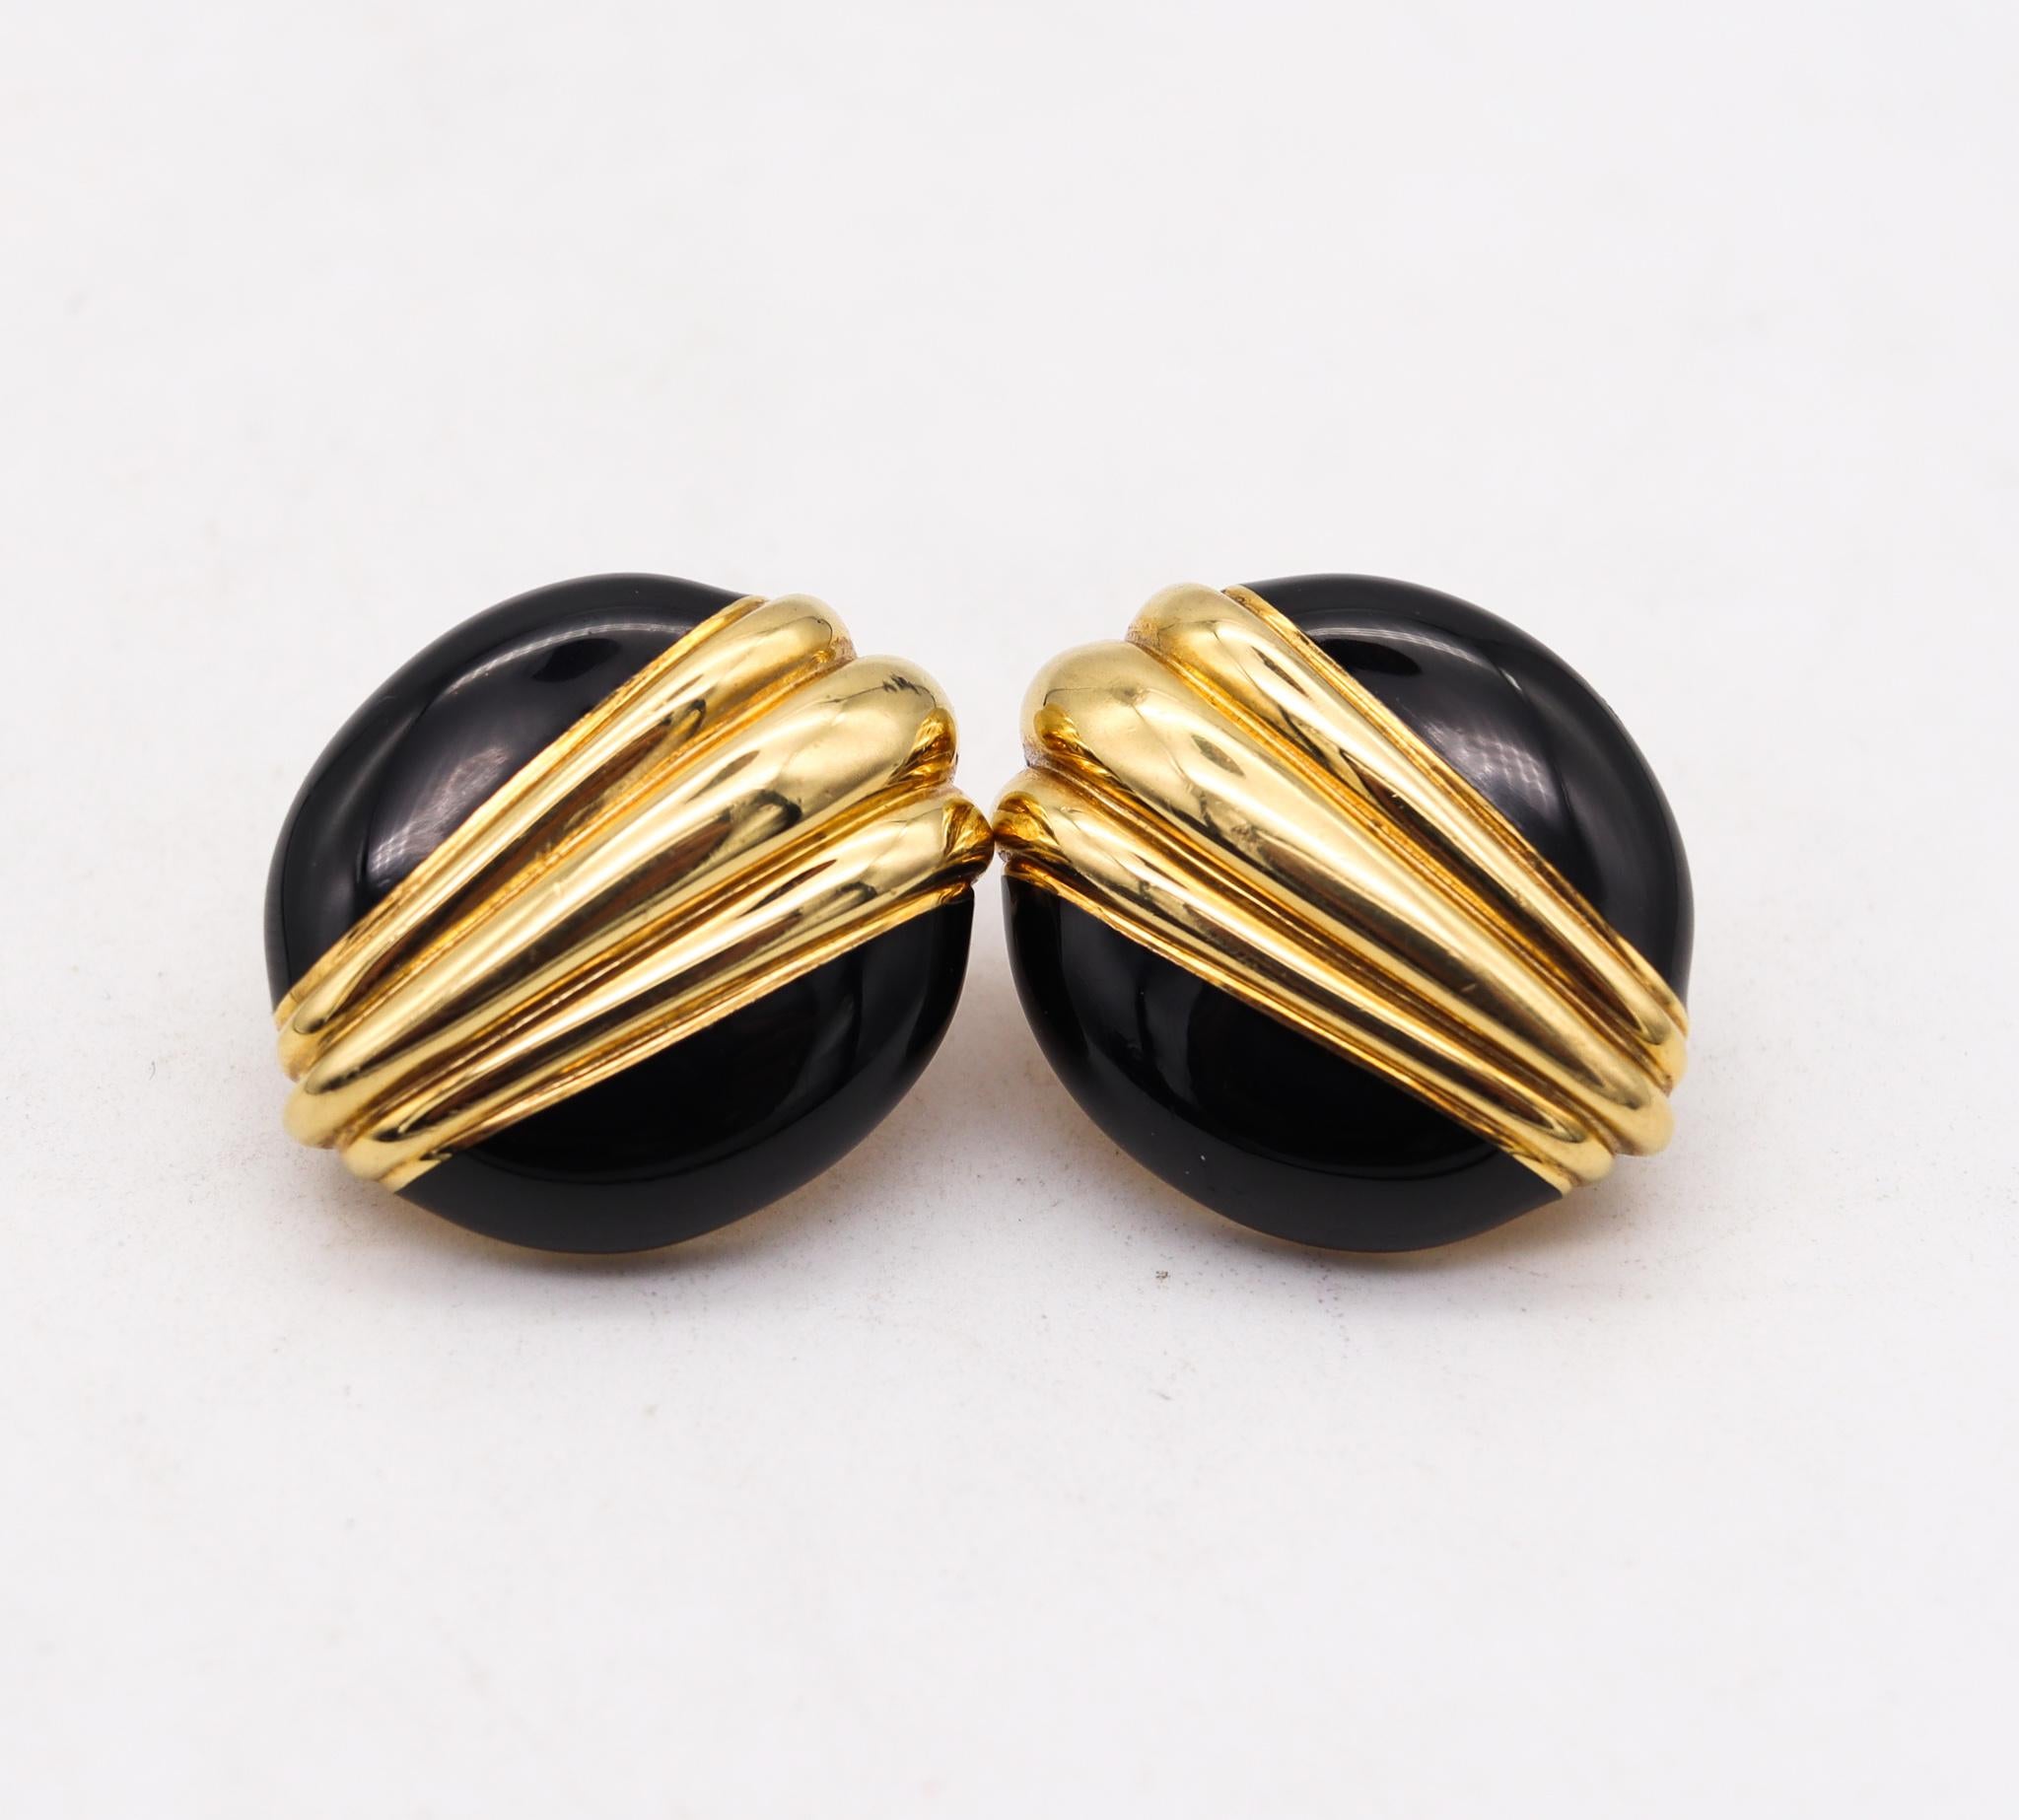 Enameled earrings designed by David Webb (1925-1975).

Beautiful rounded pair made at the Webb's atelier in New York city, back in the 1970's. These elegant clip-on earrings has been crafted in solid yellow gold of 18 karats and carefully